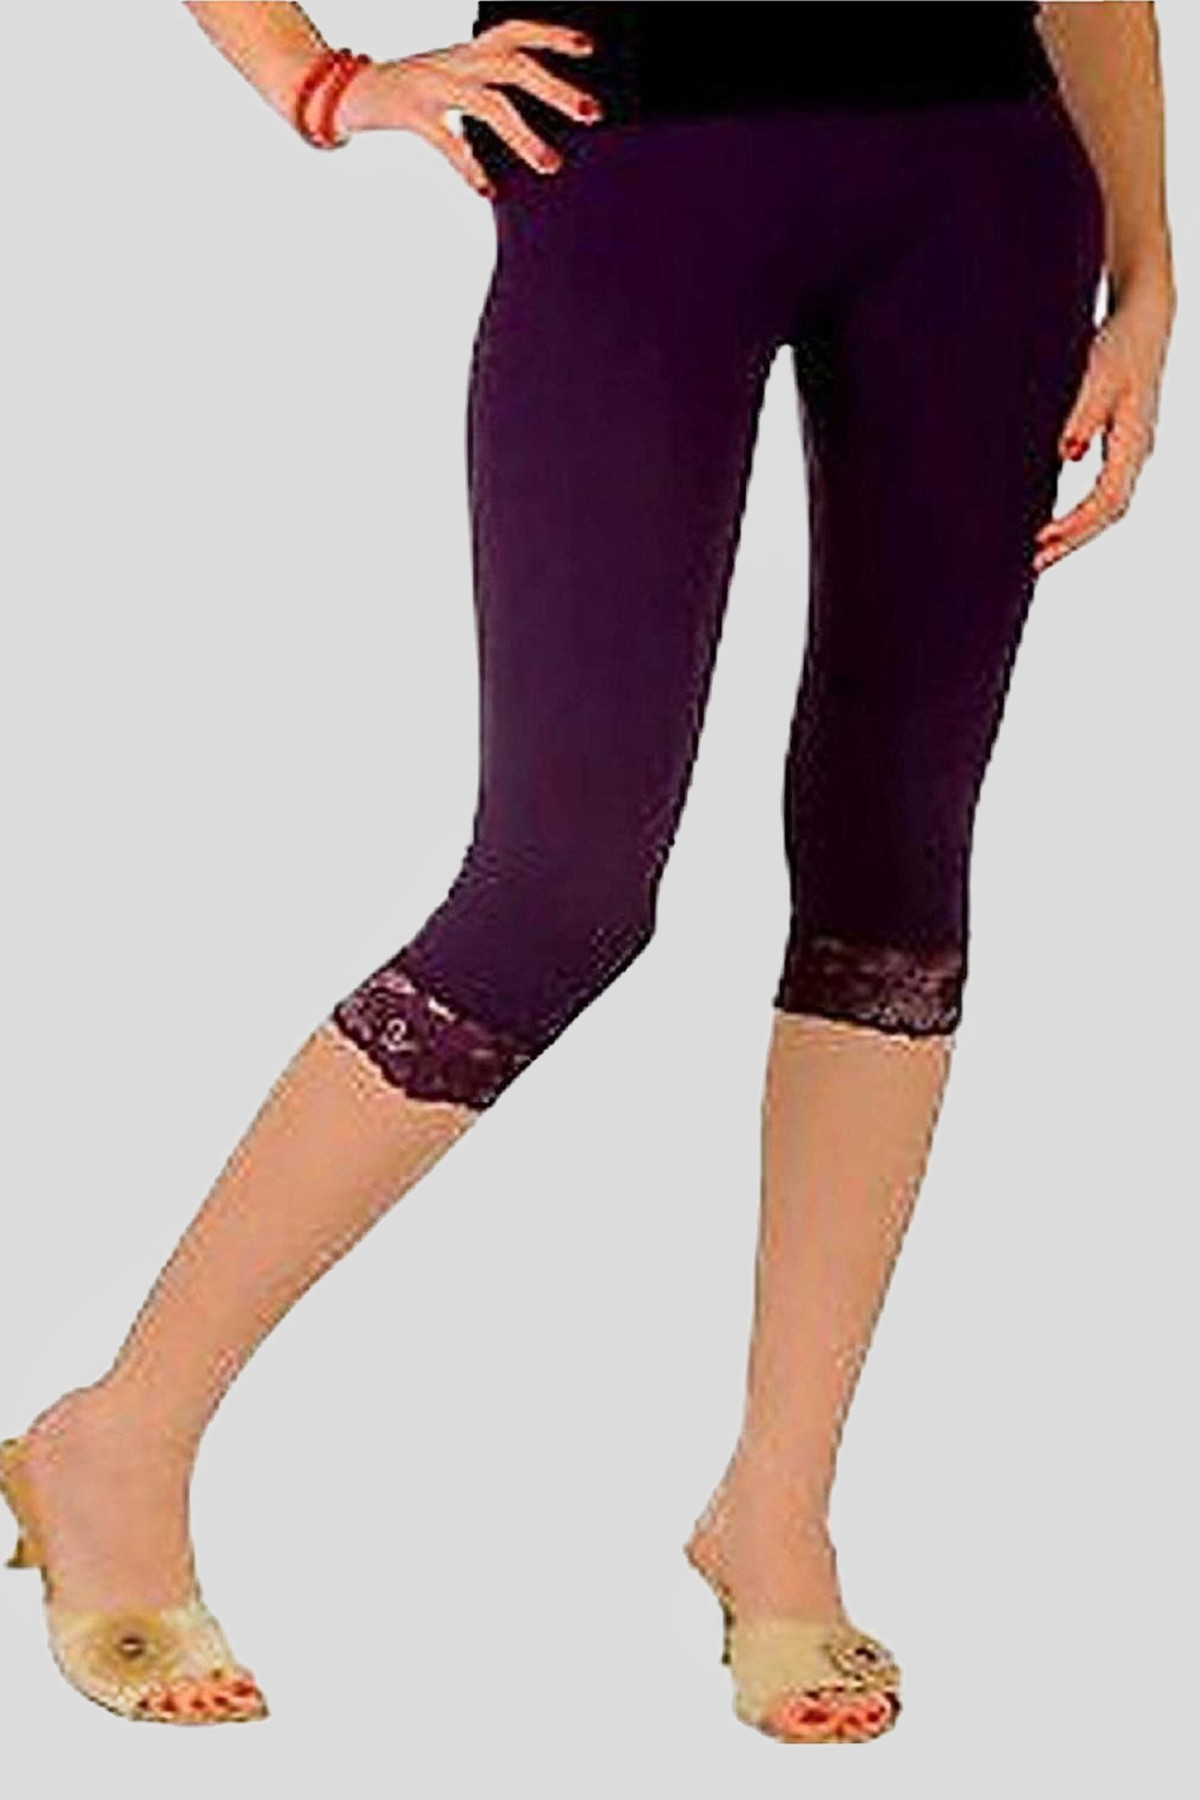 Buy Lace Leggings for Women Plus Size High Waisted Capri Cropped Leggings  Stretch Lace Trim Soft Tights Yoga Pants at Amazon.in